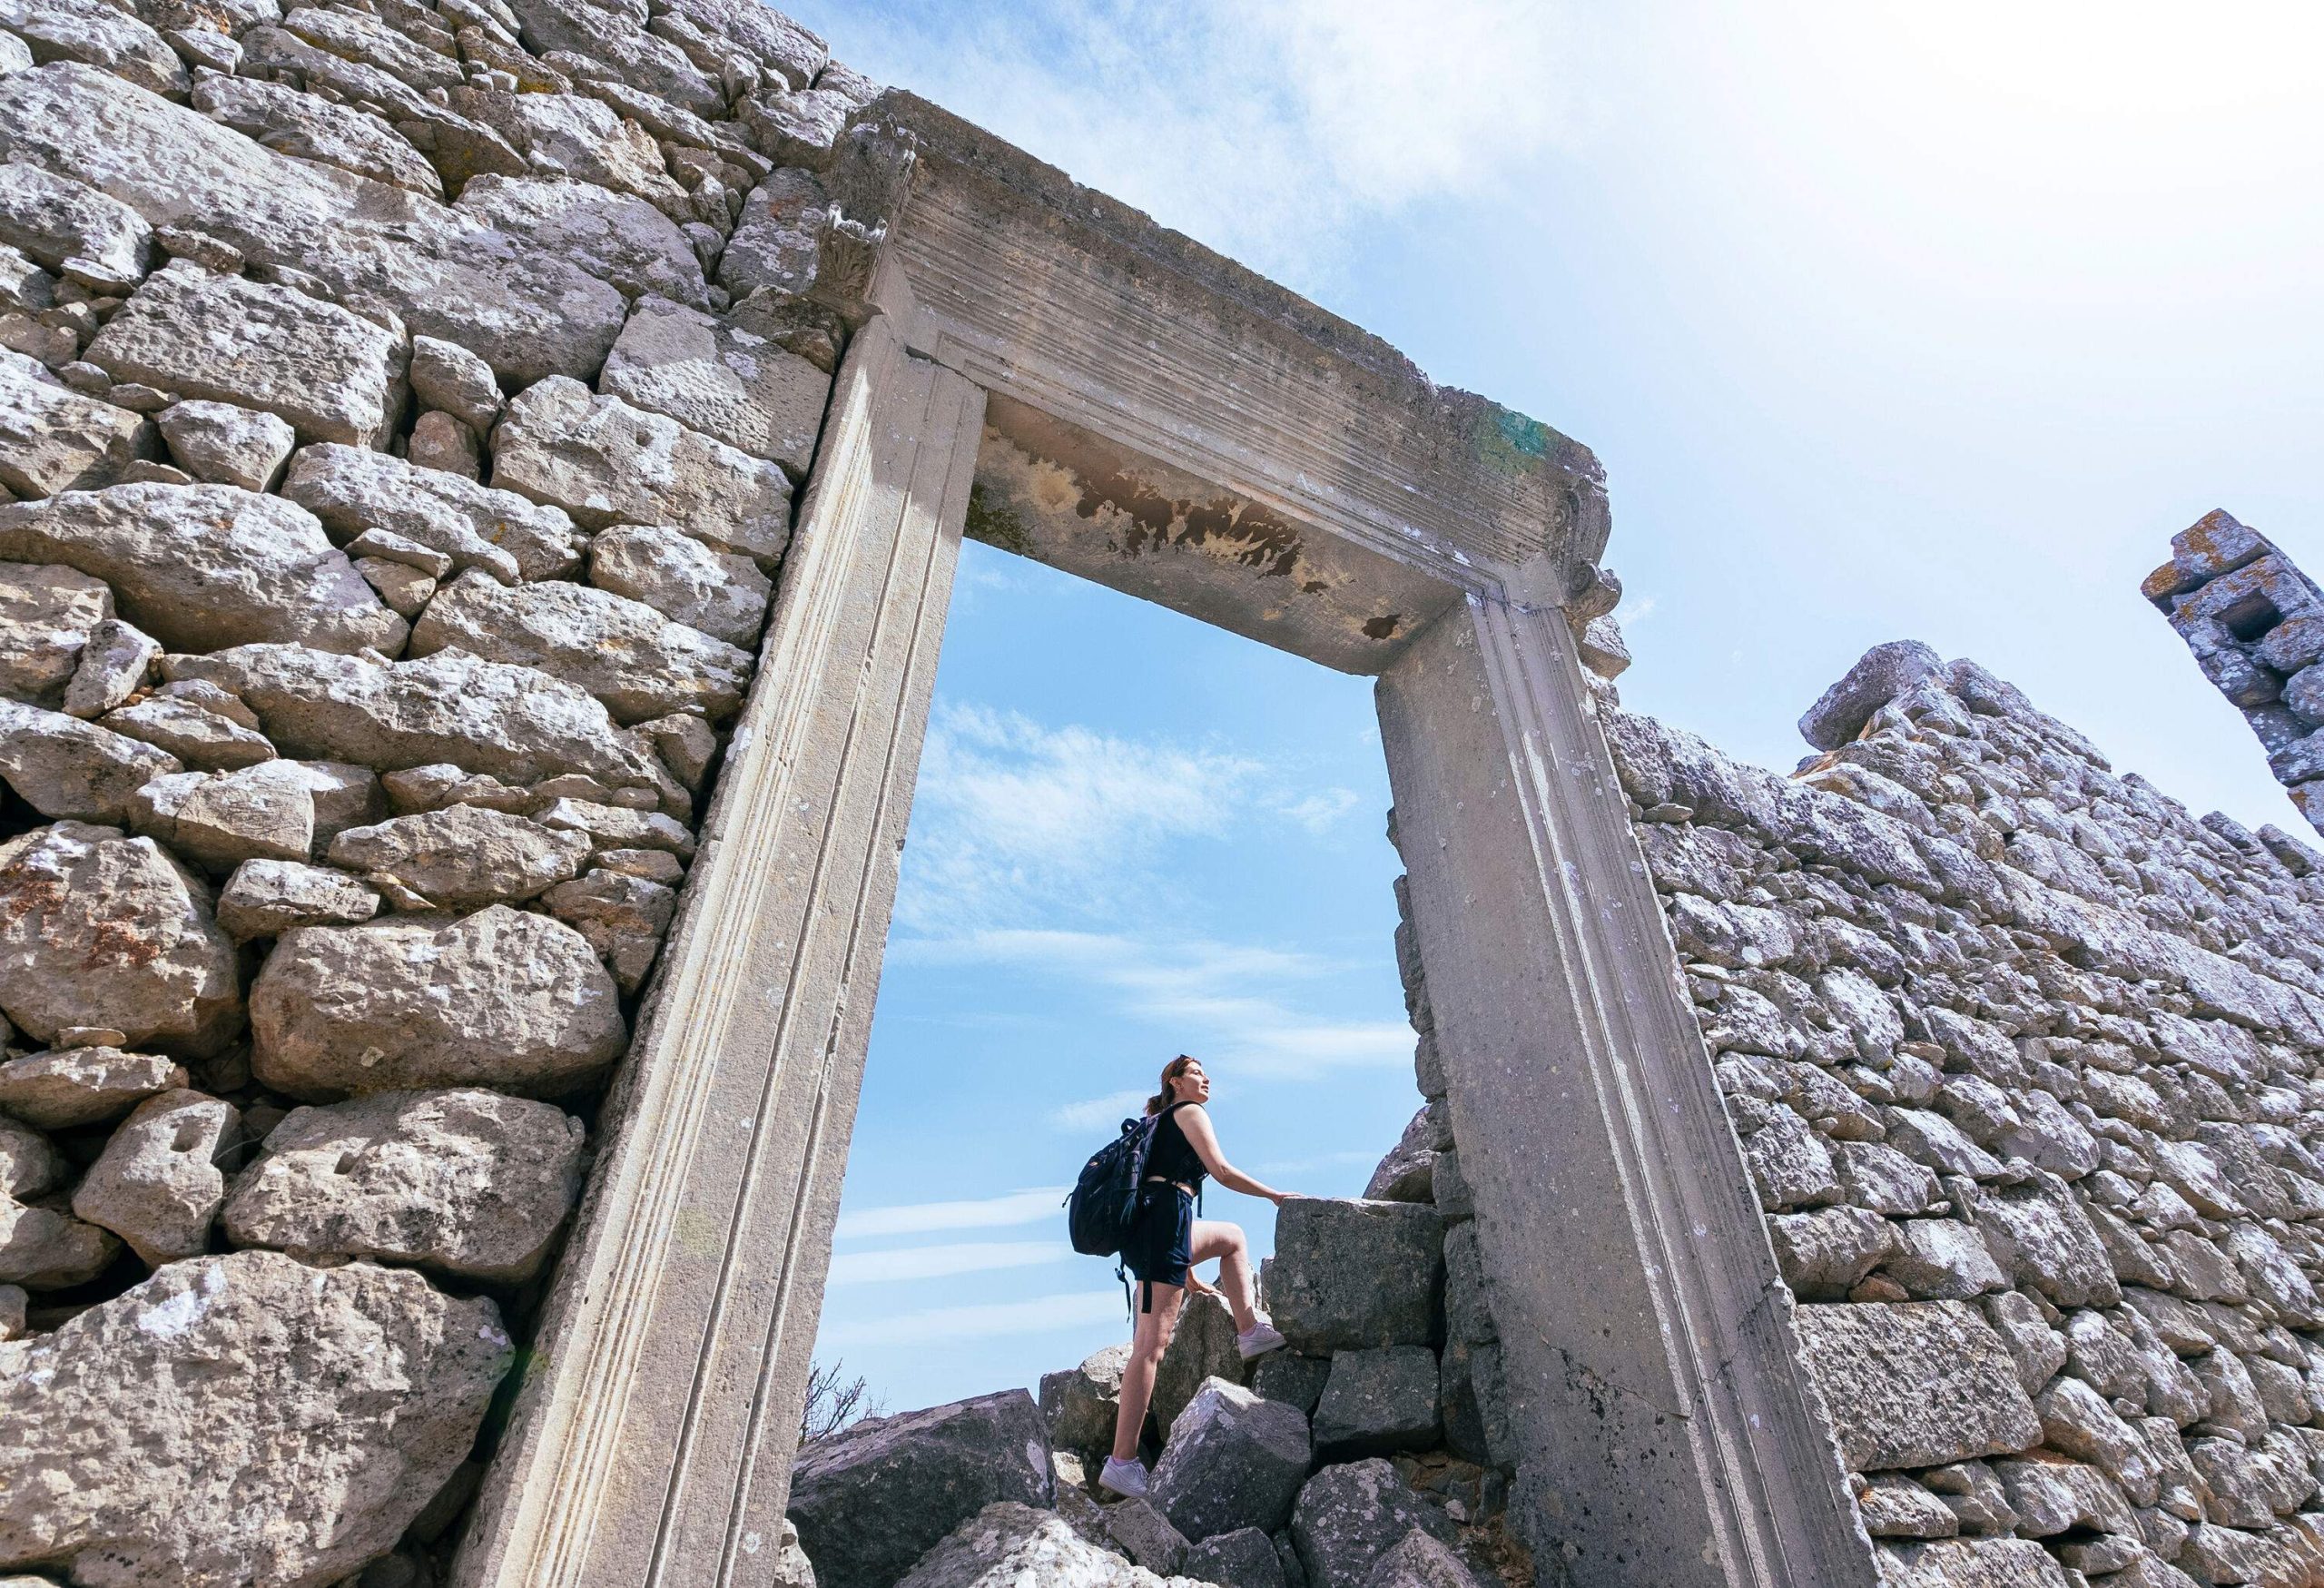 A young woman climbing over large blocks of rocks behind an ancient entry gate.